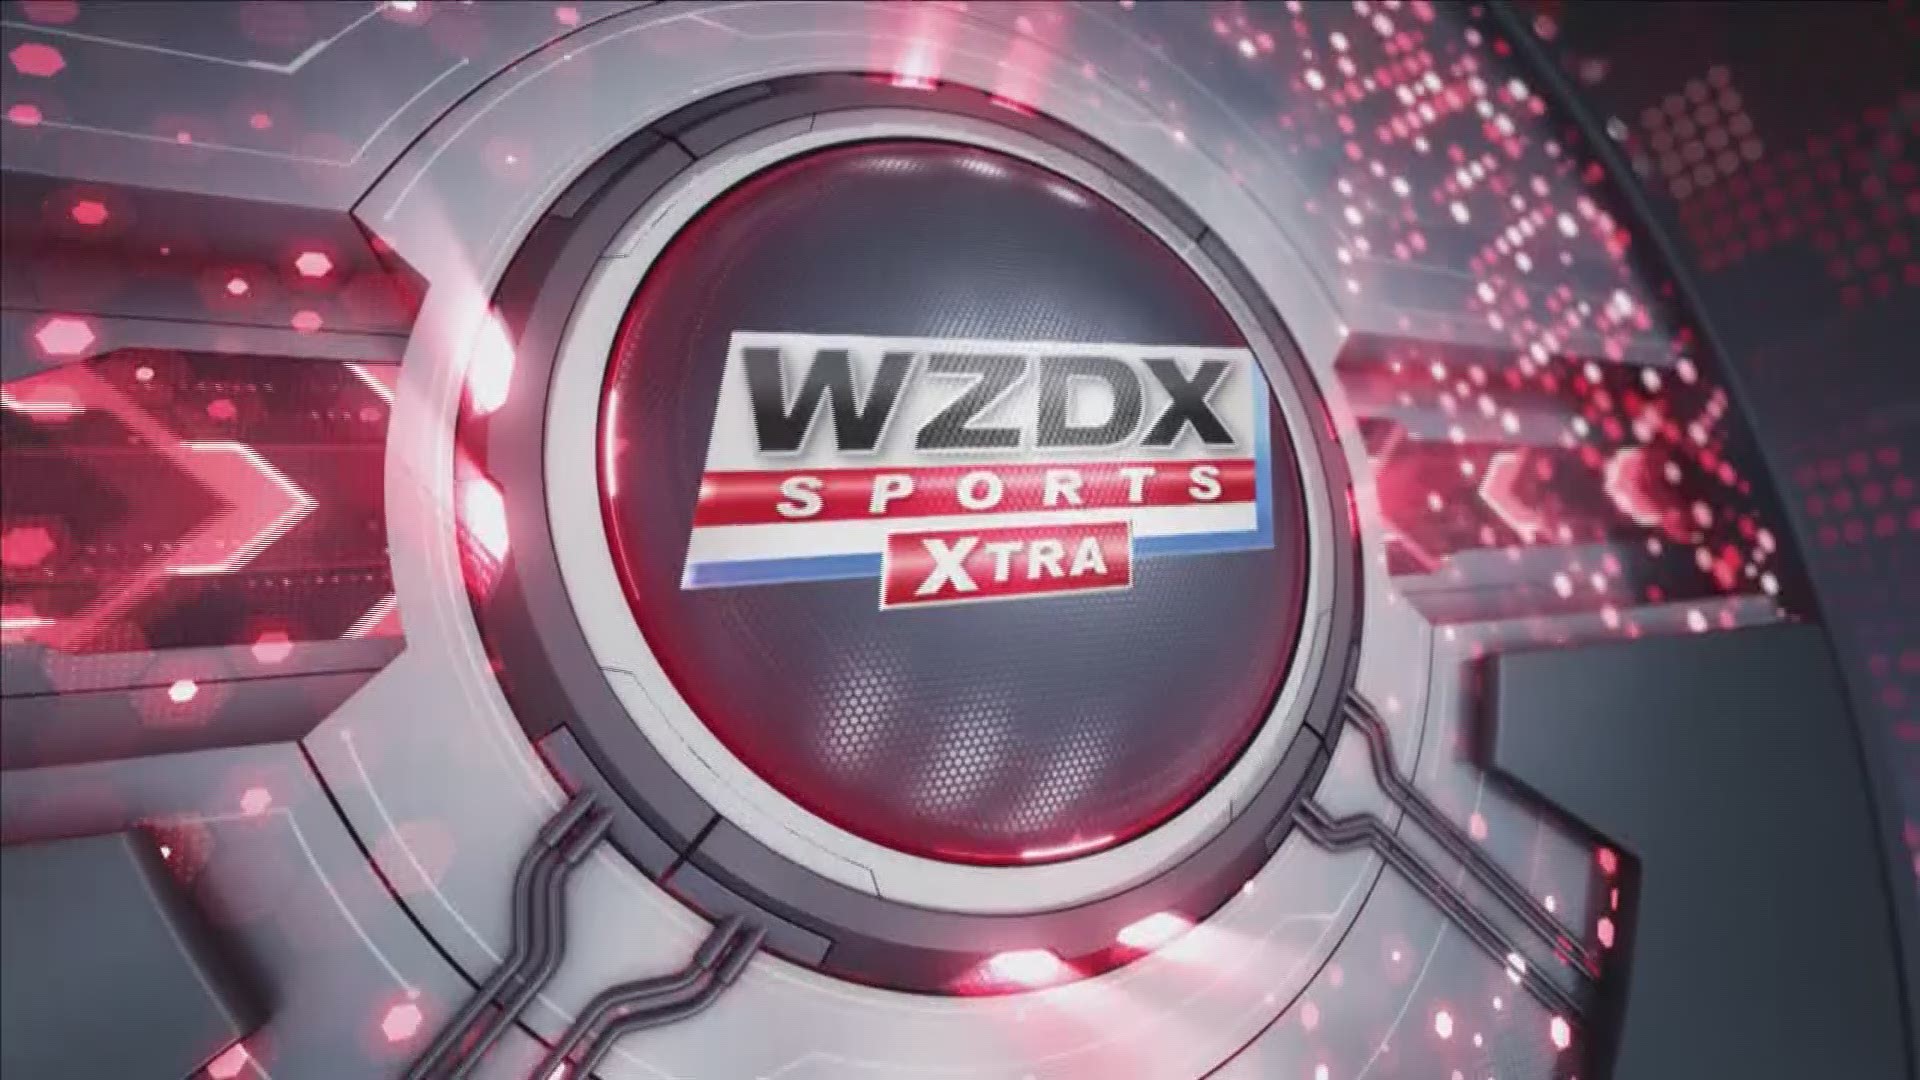 Following a march by the Alabama players,  Coach Saban received criticism from individuals outside of the program. The WZDX Sports Team reacted to the events